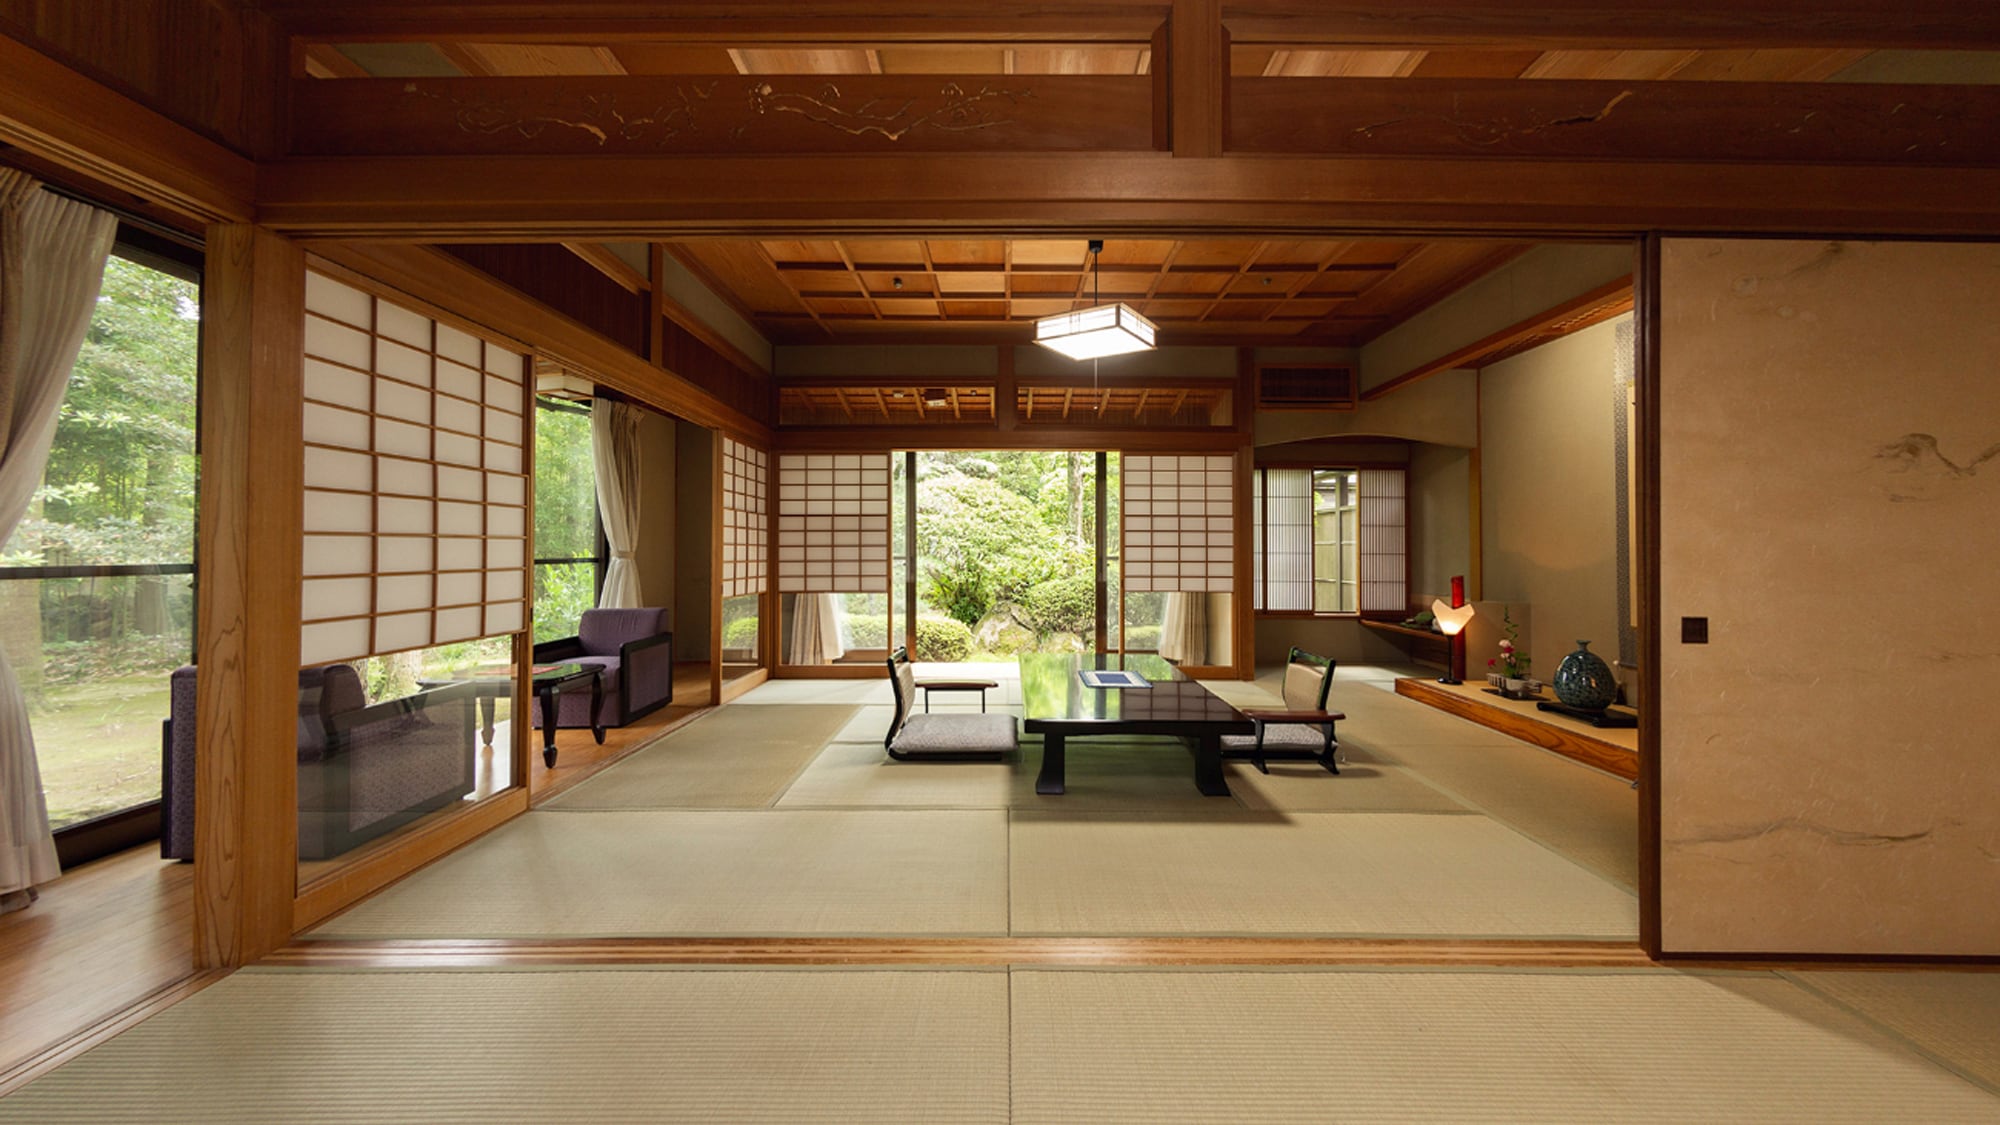 [Suigetsu / Ume] This is the largest room in Suigetsu, and the view of the garden from the room is wonderful.